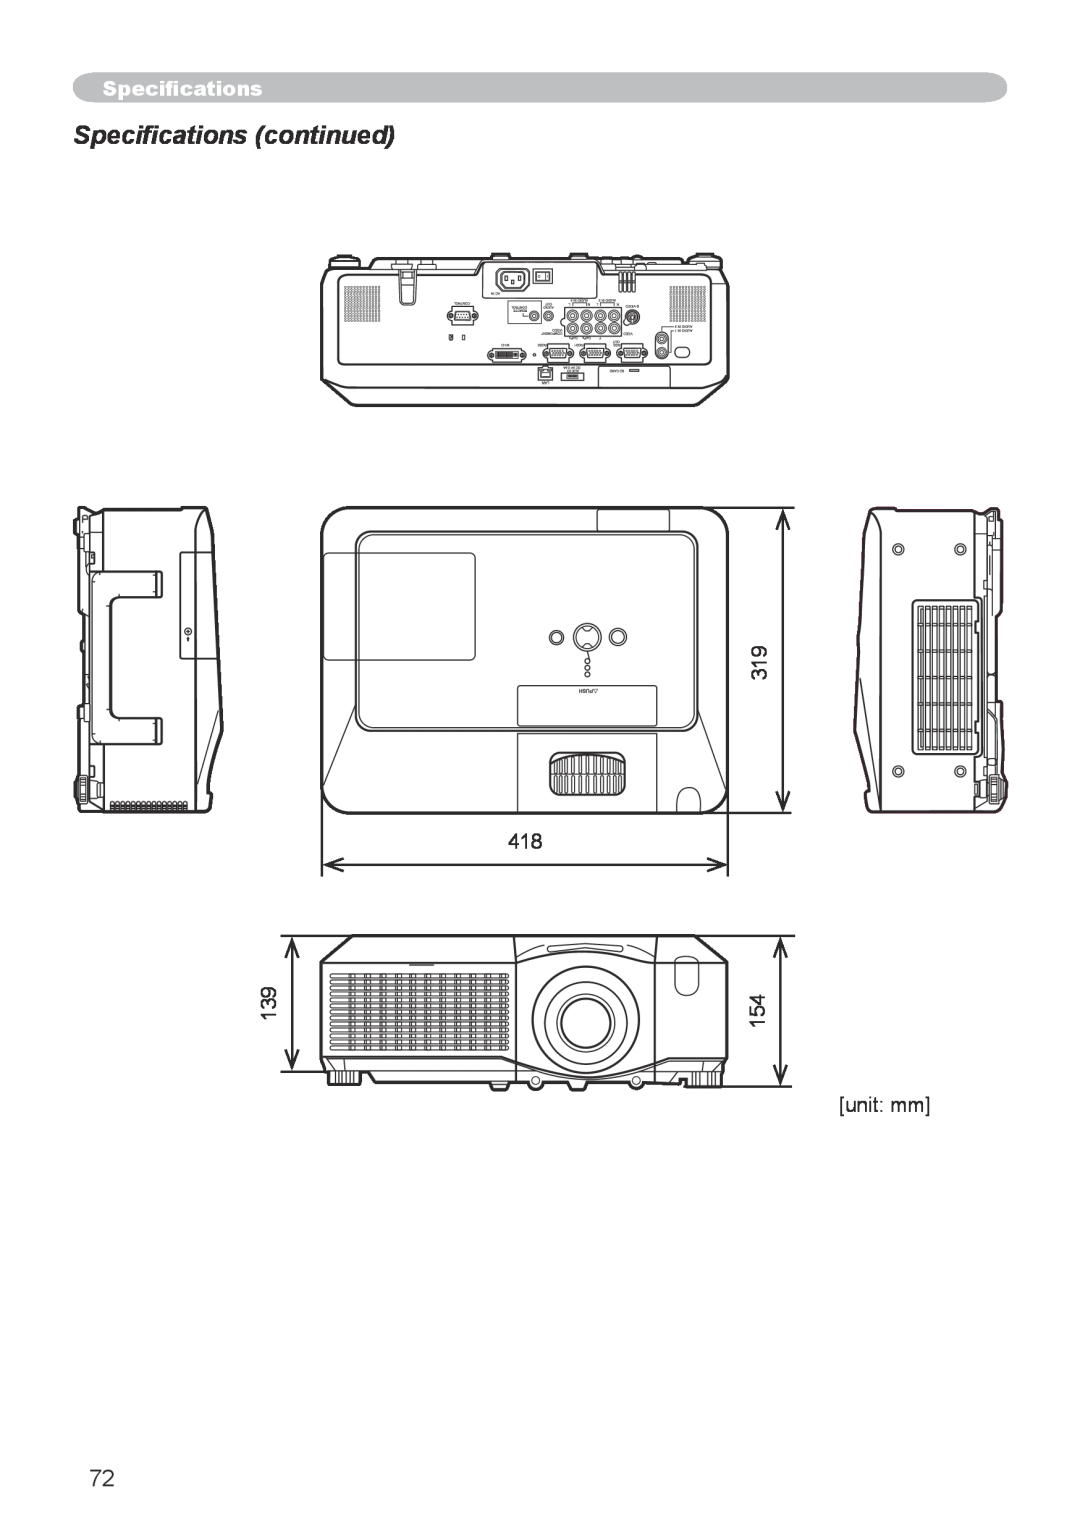 Hitachi CP-X608 user manual Specifications continued, 319 418, unit mm 